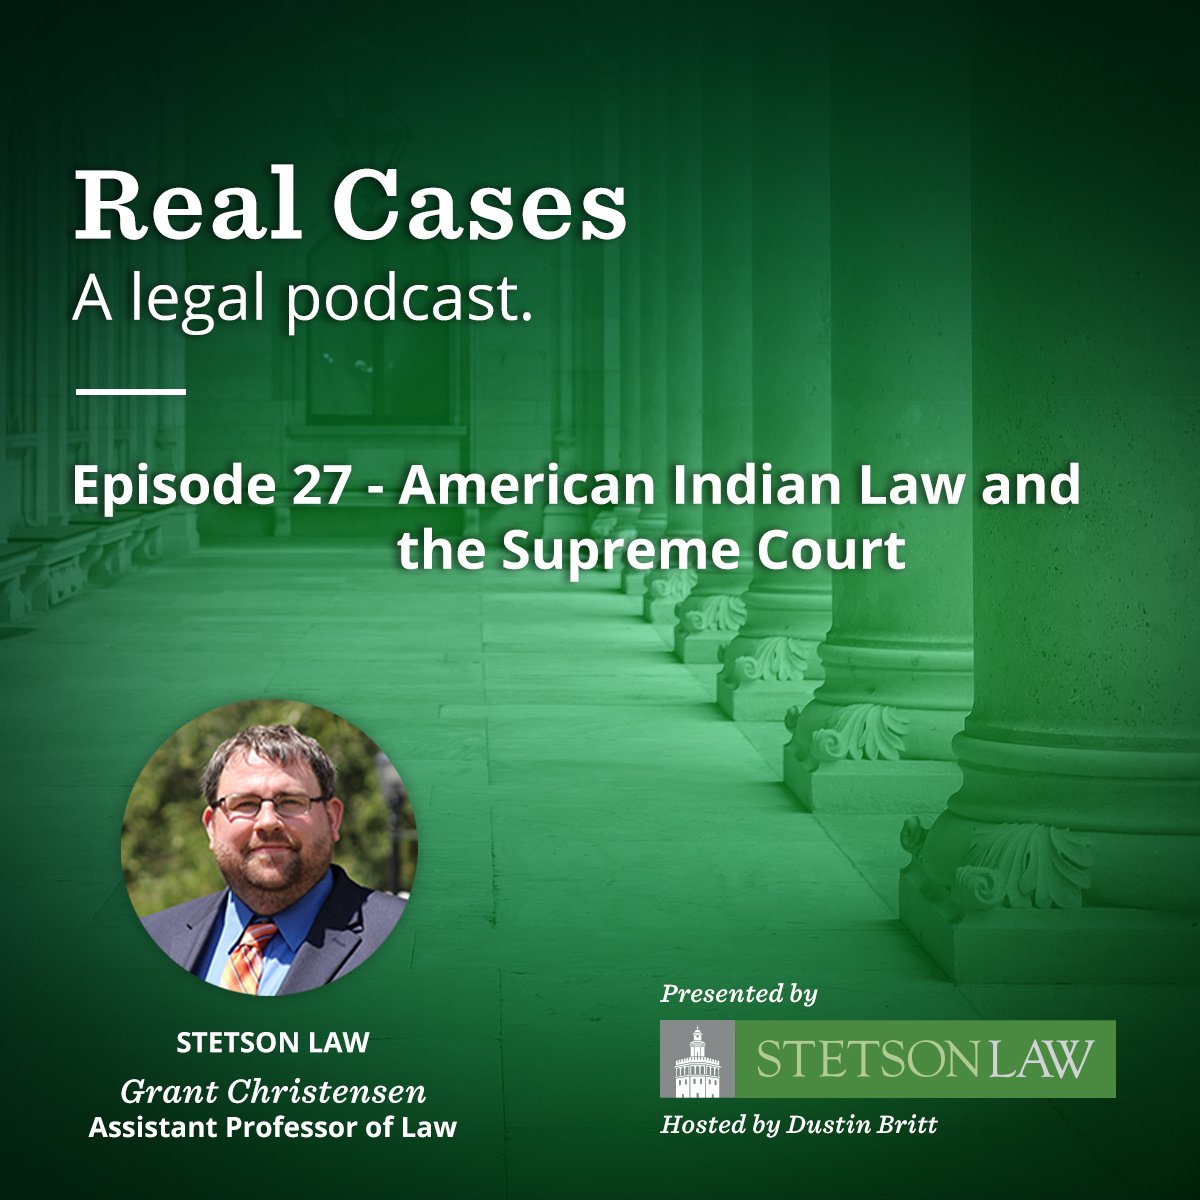 Real Cases - a legal podcast. Episode 27: American Indian Law and the Supreme Court - Grant Christensen